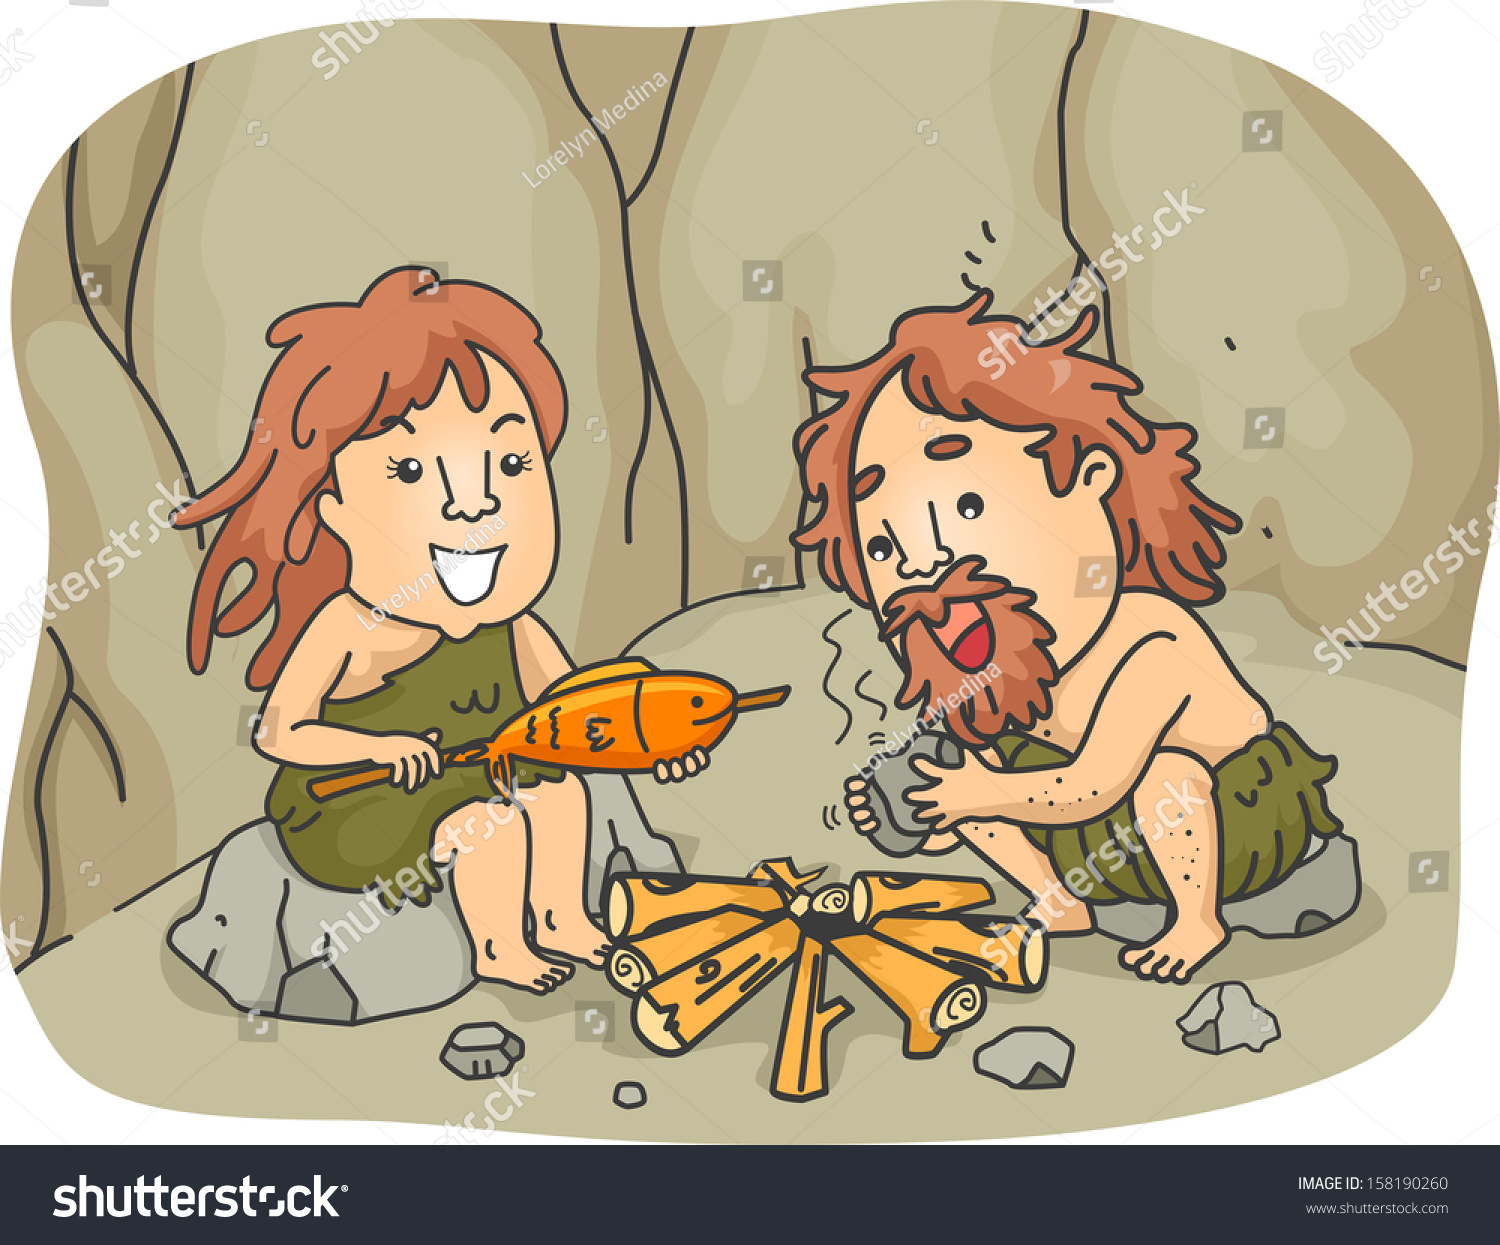 SVG of Illustration of a Caveman Couple Trying to Cook Their Food by Starting a Fire with Two Pieces of Stones  svg